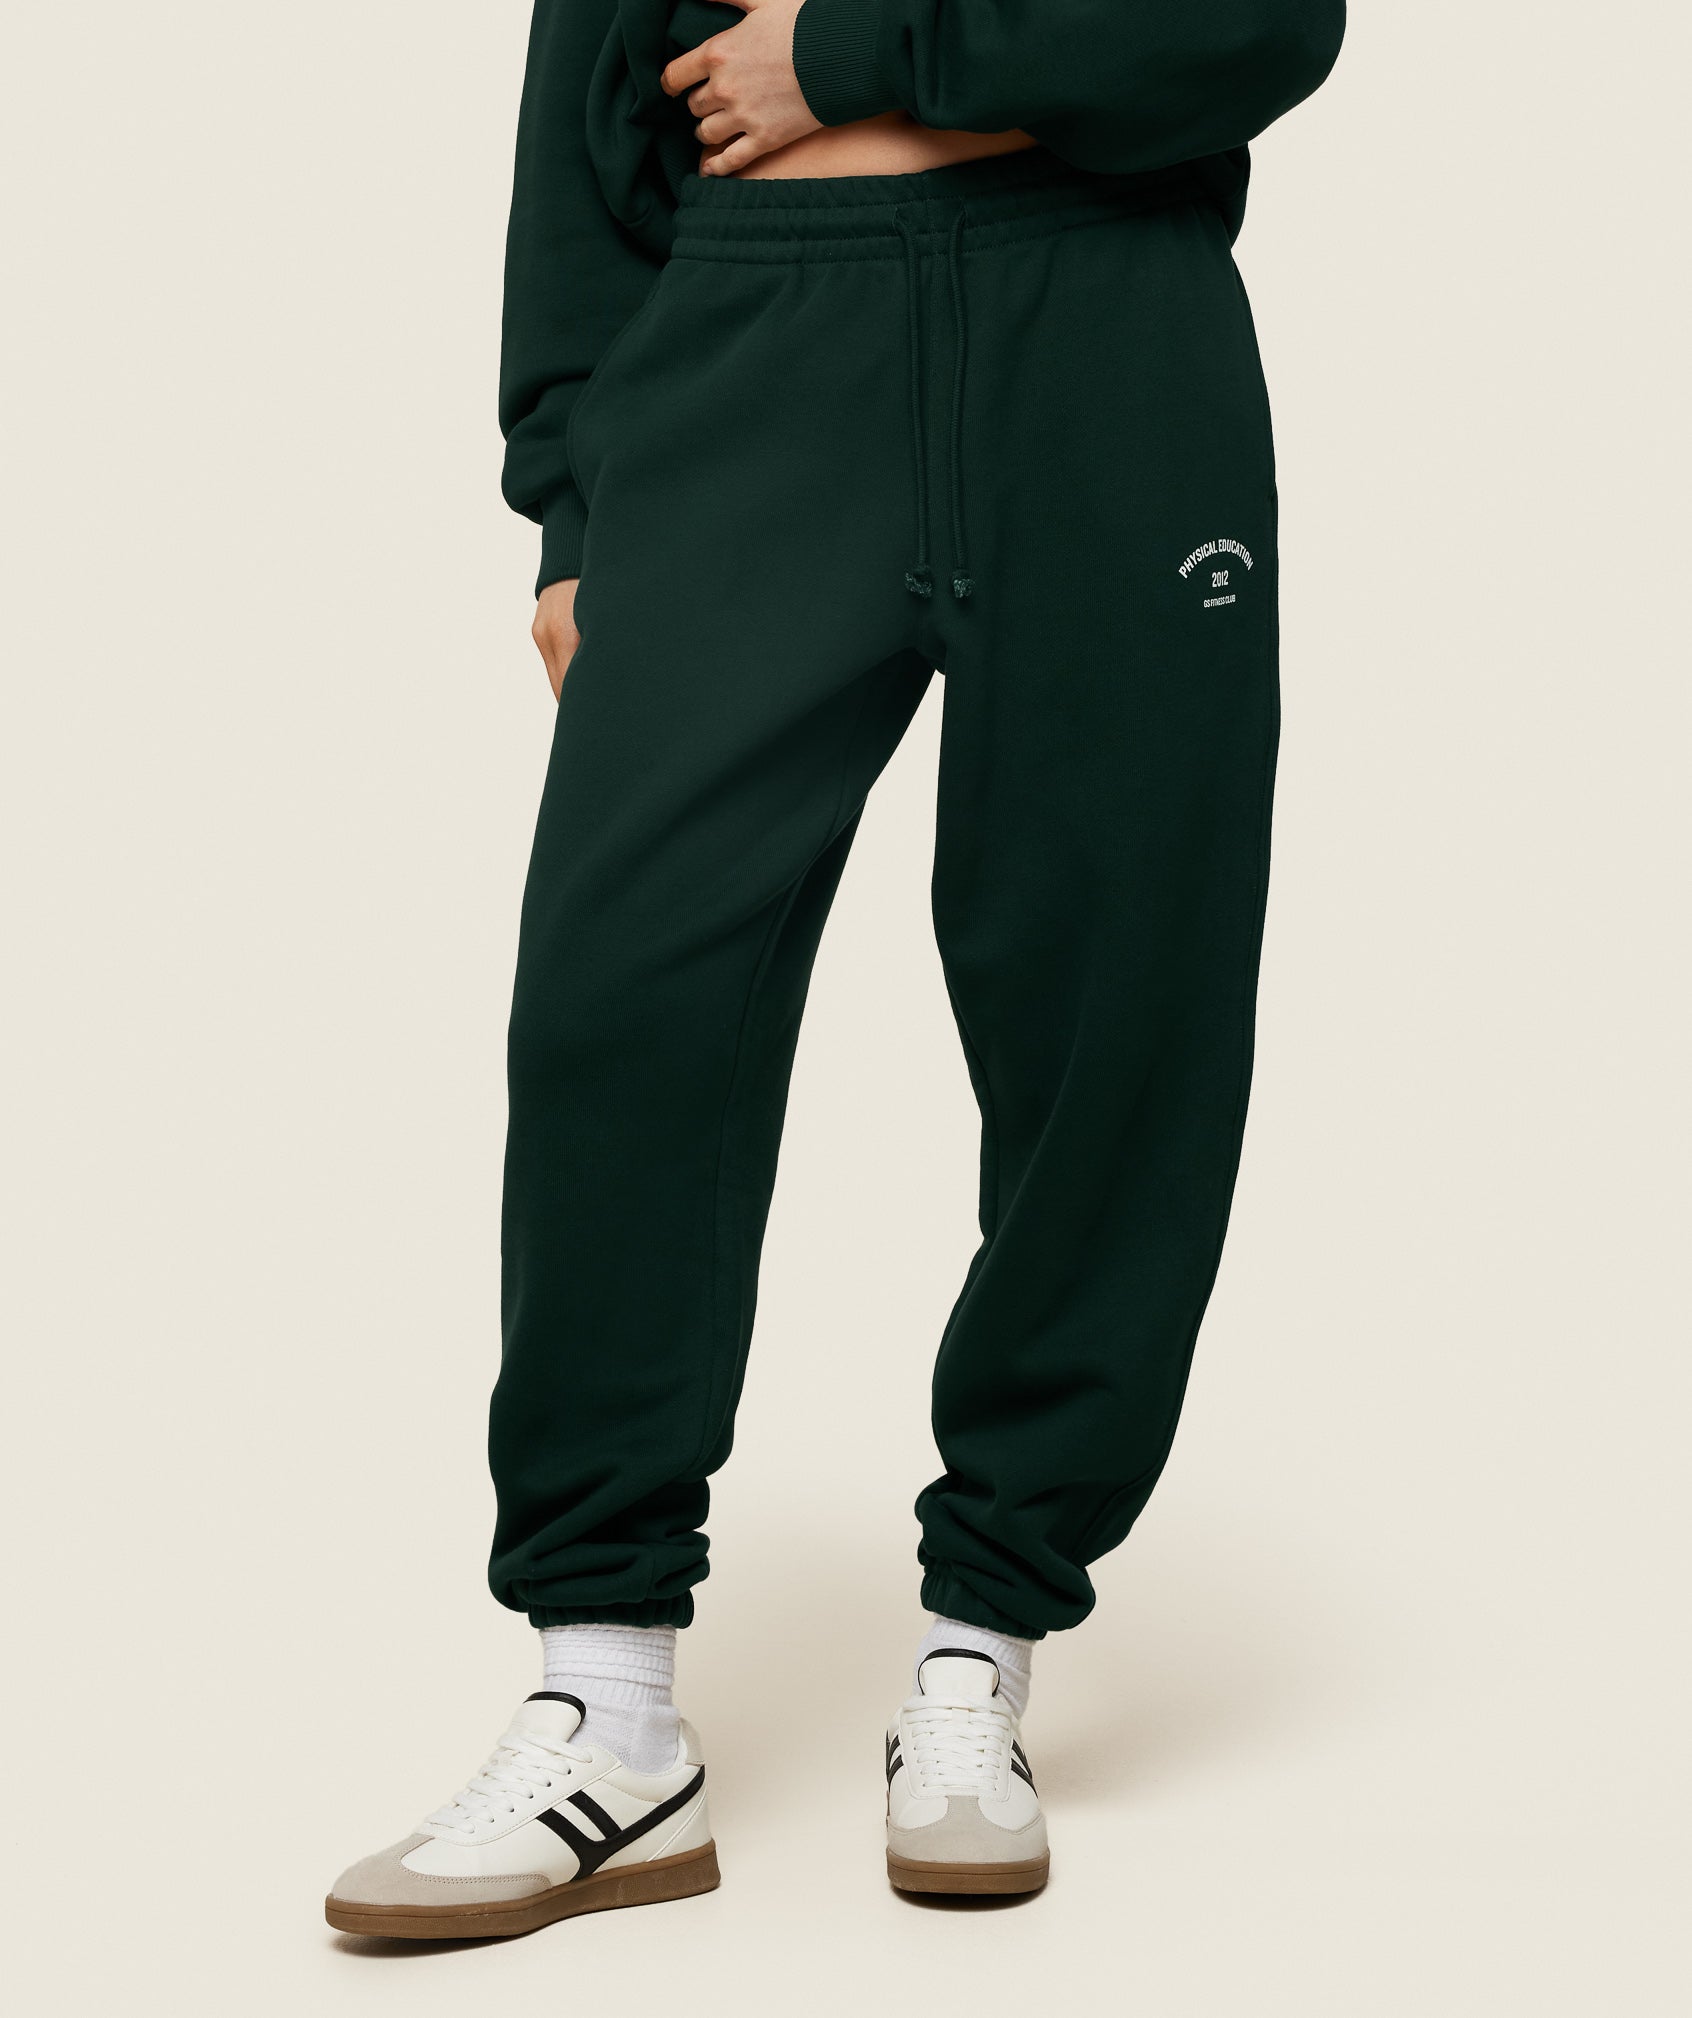 Phys Ed Graphic Sweatpants in Green - view 1